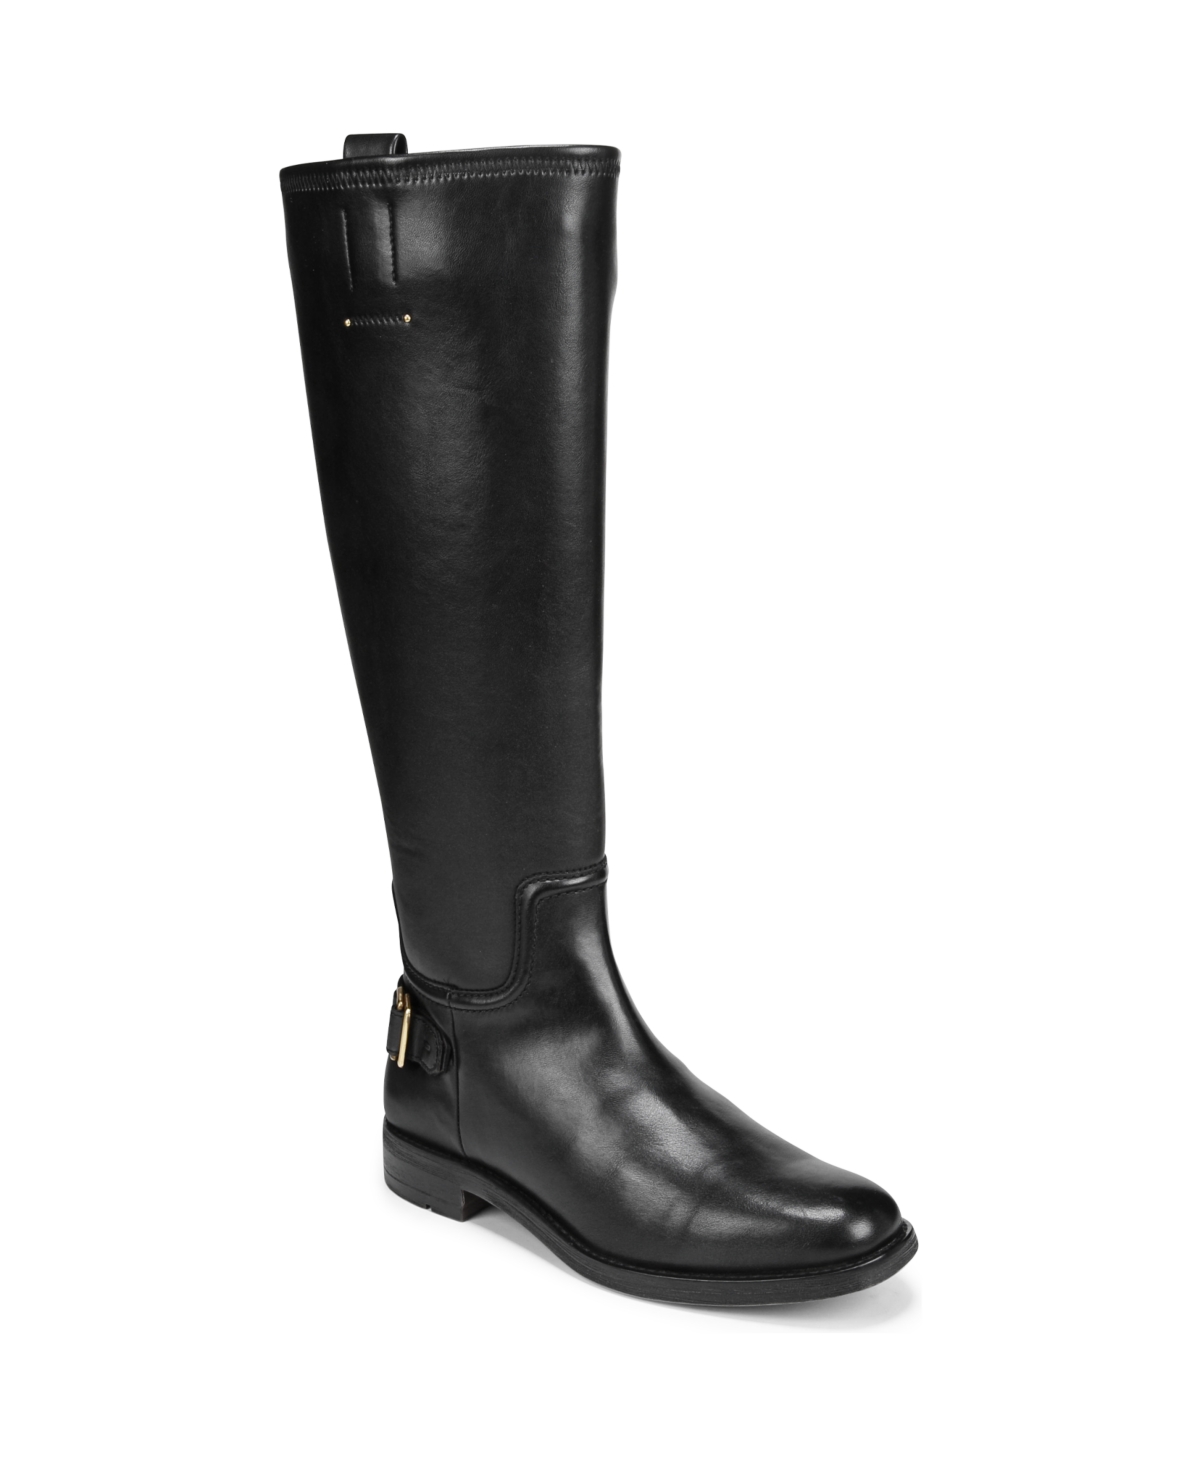 Merina Knee High Riding Boots - Black Faux Leather